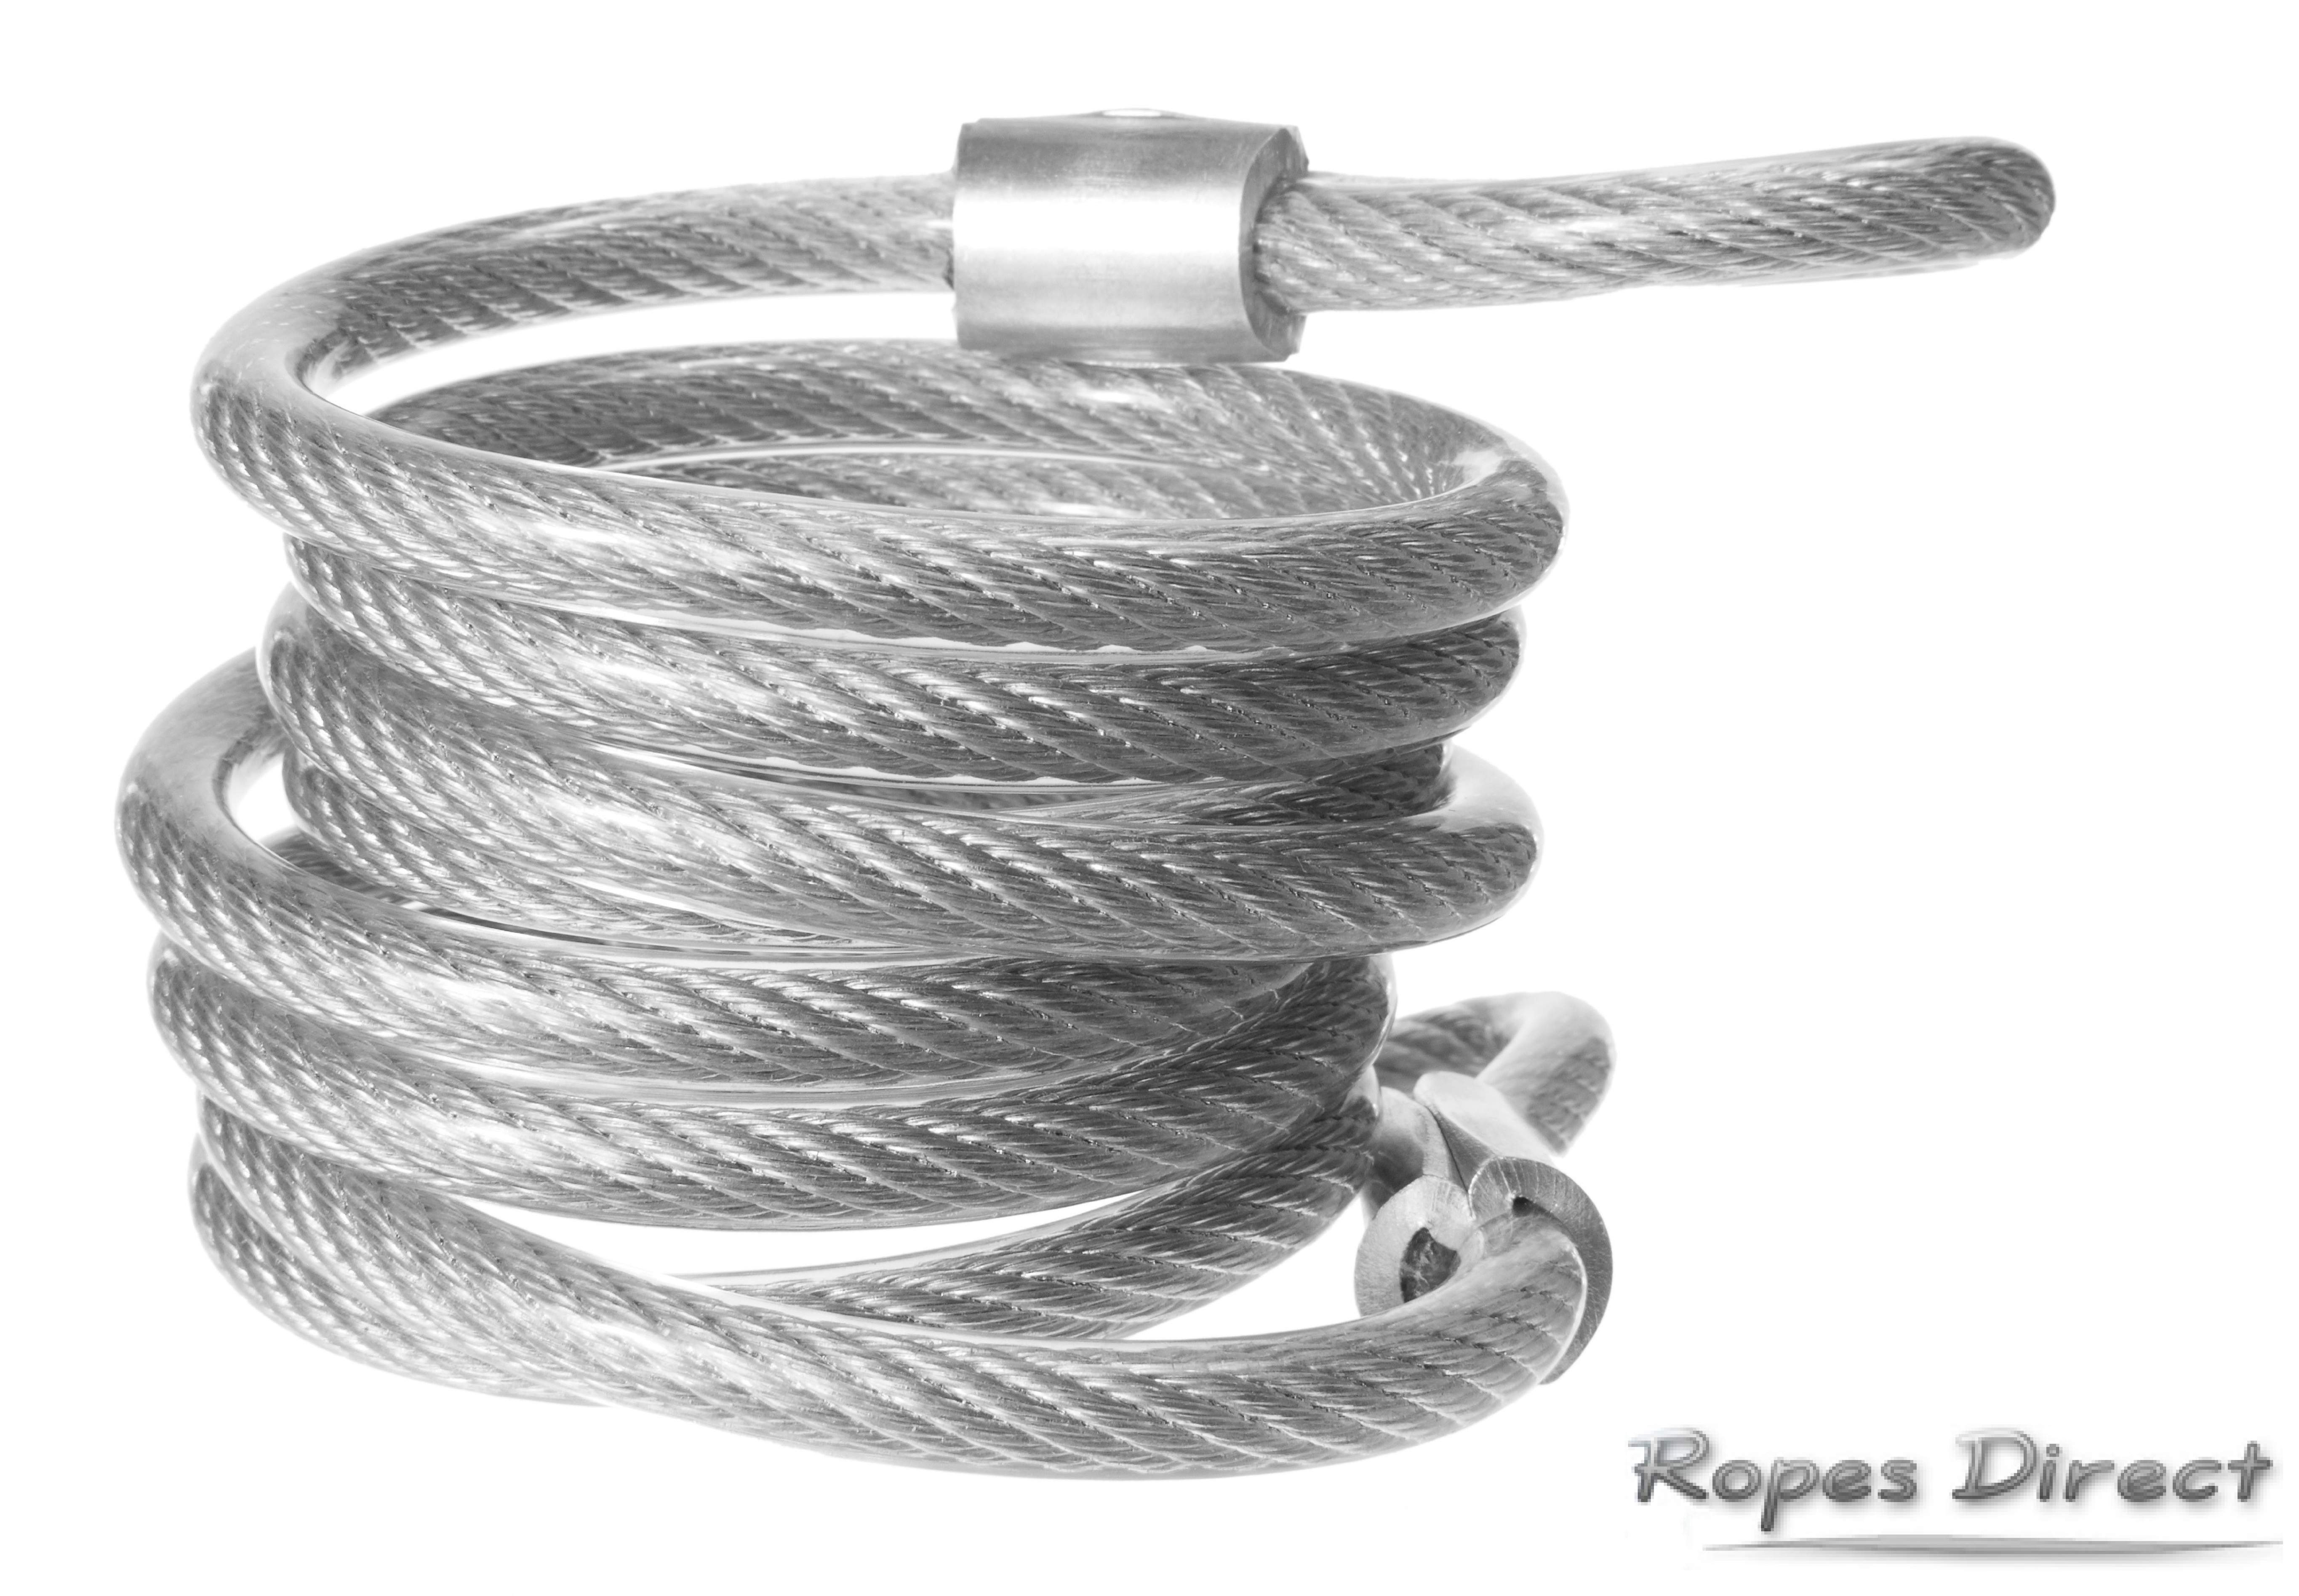 https://www.ropesdirect.co.uk/blog/wp-content/uploads/2019/03/wirerope1.png